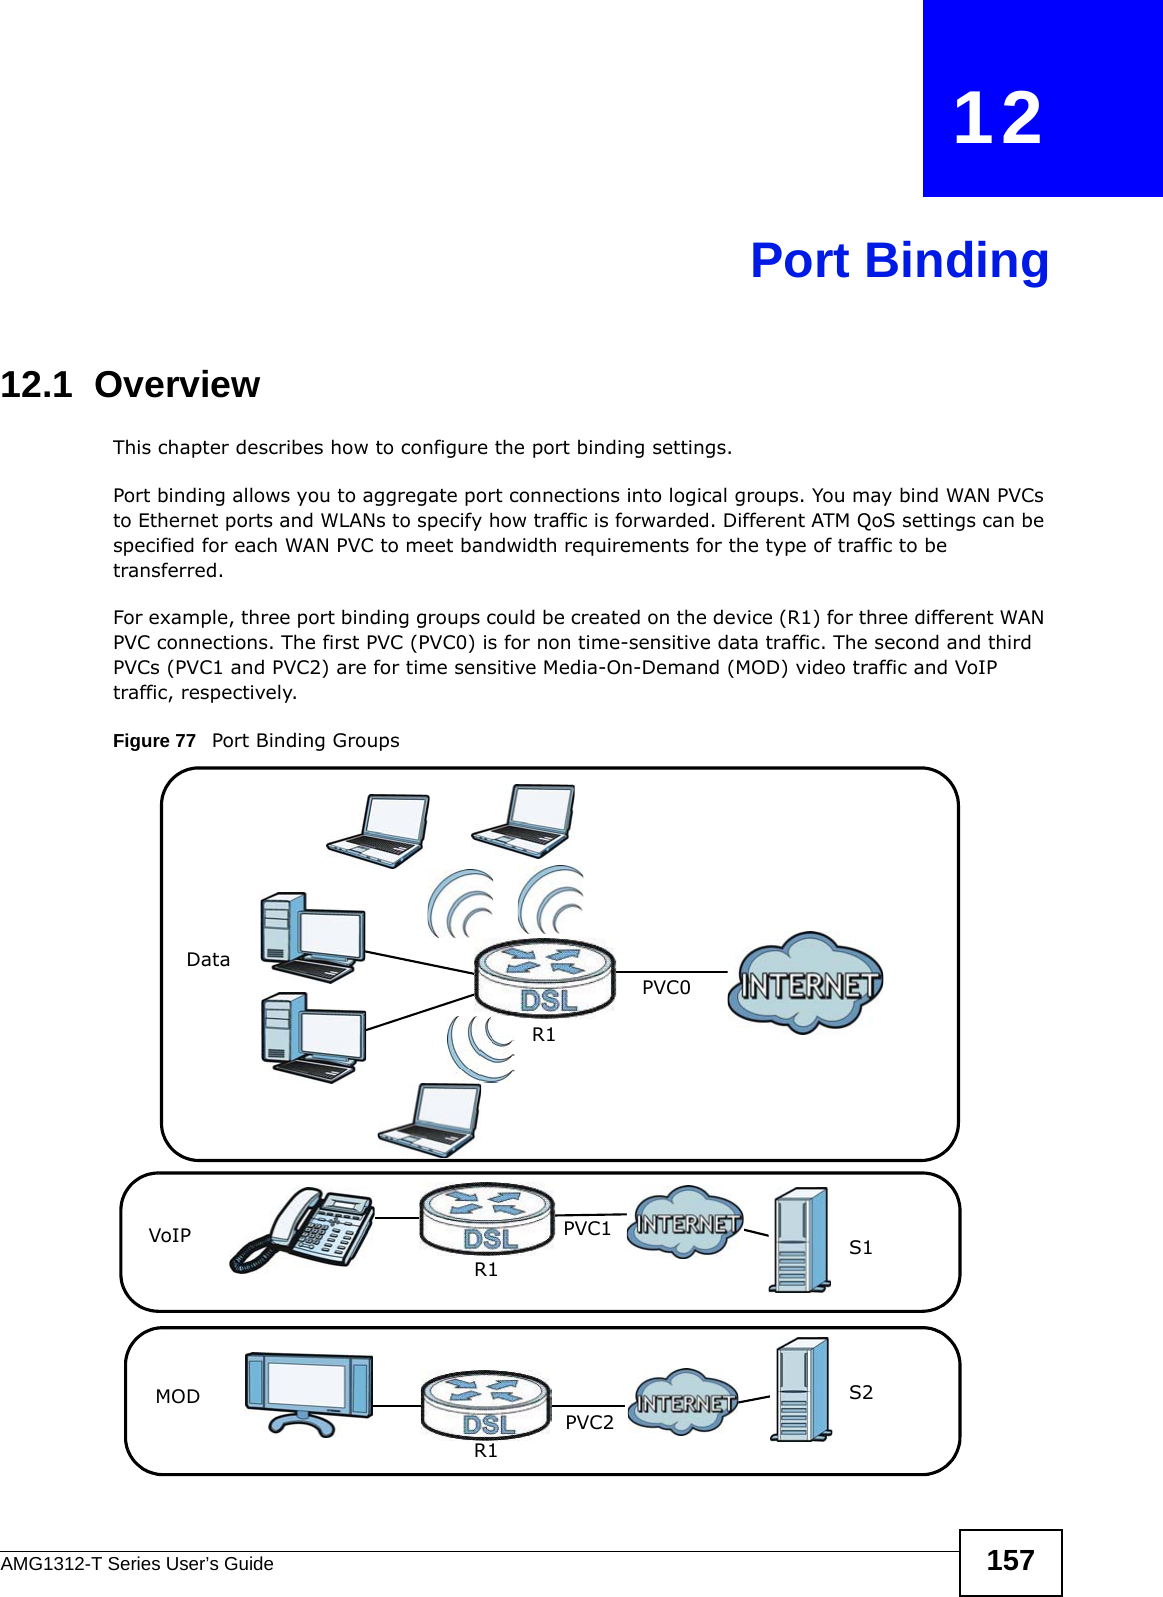 AMG1312-T Series User’s Guide 157CHAPTER   12Port Binding12.1  OverviewThis chapter describes how to configure the port binding settings.Port binding allows you to aggregate port connections into logical groups. You may bind WAN PVCs to Ethernet ports and WLANs to specify how traffic is forwarded. Different ATM QoS settings can be specified for each WAN PVC to meet bandwidth requirements for the type of traffic to be transferred.For example, three port binding groups could be created on the device (R1) for three different WAN PVC connections. The first PVC (PVC0) is for non time-sensitive data traffic. The second and third PVCs (PVC1 and PVC2) are for time sensitive Media-On-Demand (MOD) video traffic and VoIP traffic, respectively.   Figure 77   Port Binding GroupsS2S1R1R1R1MODVoIPDataPVC0PVC2PVC1